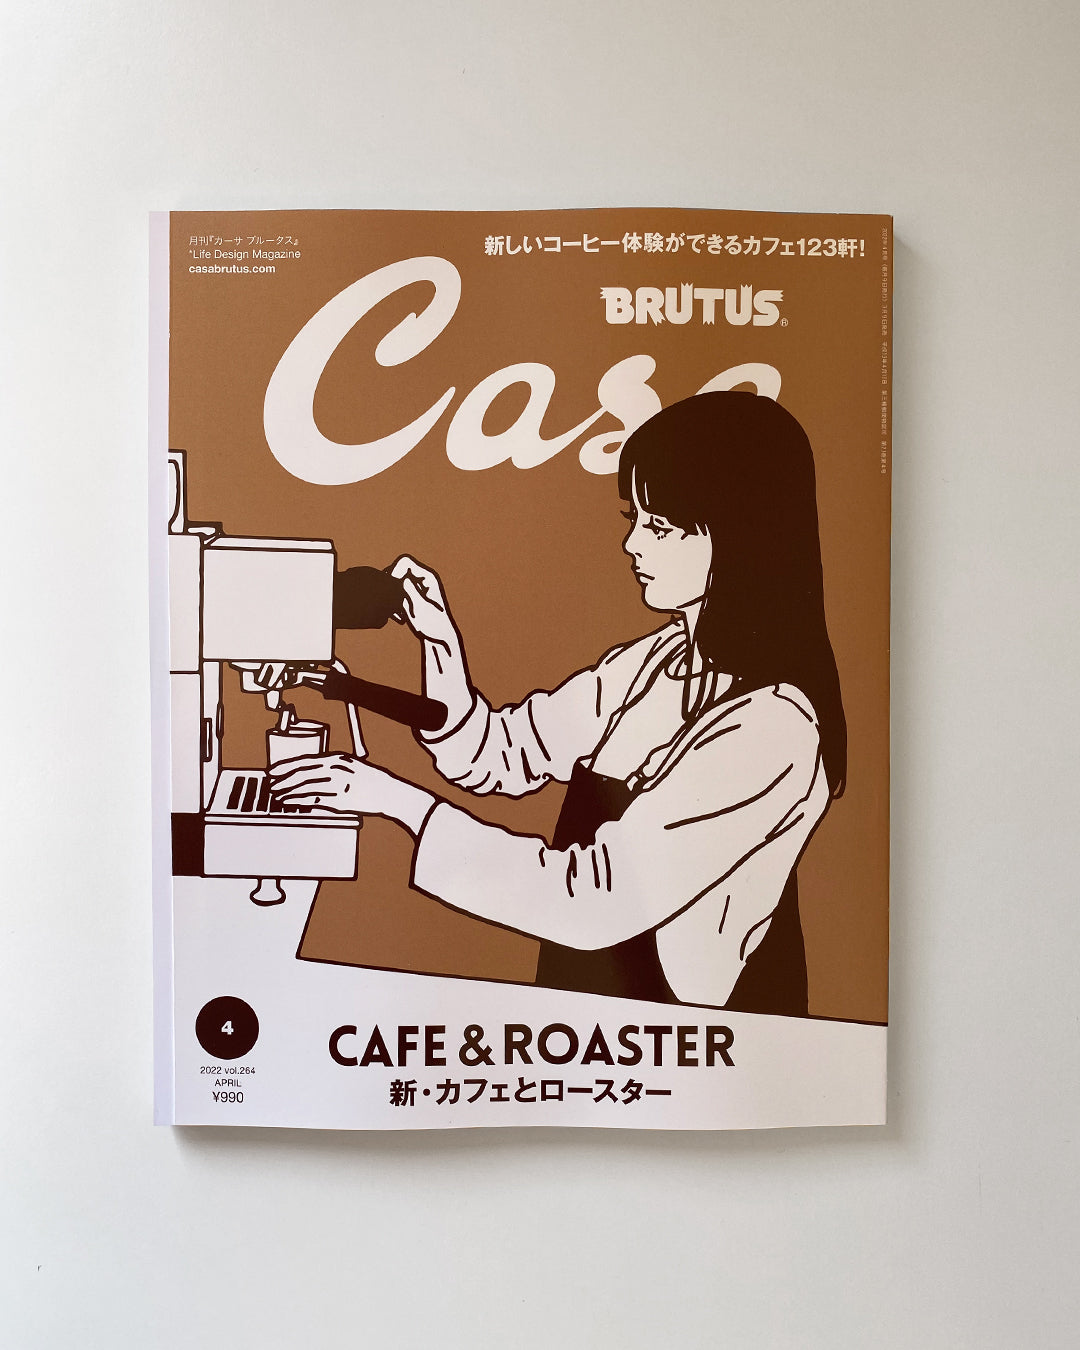 Casa Brutus Issue 264 Front Cover